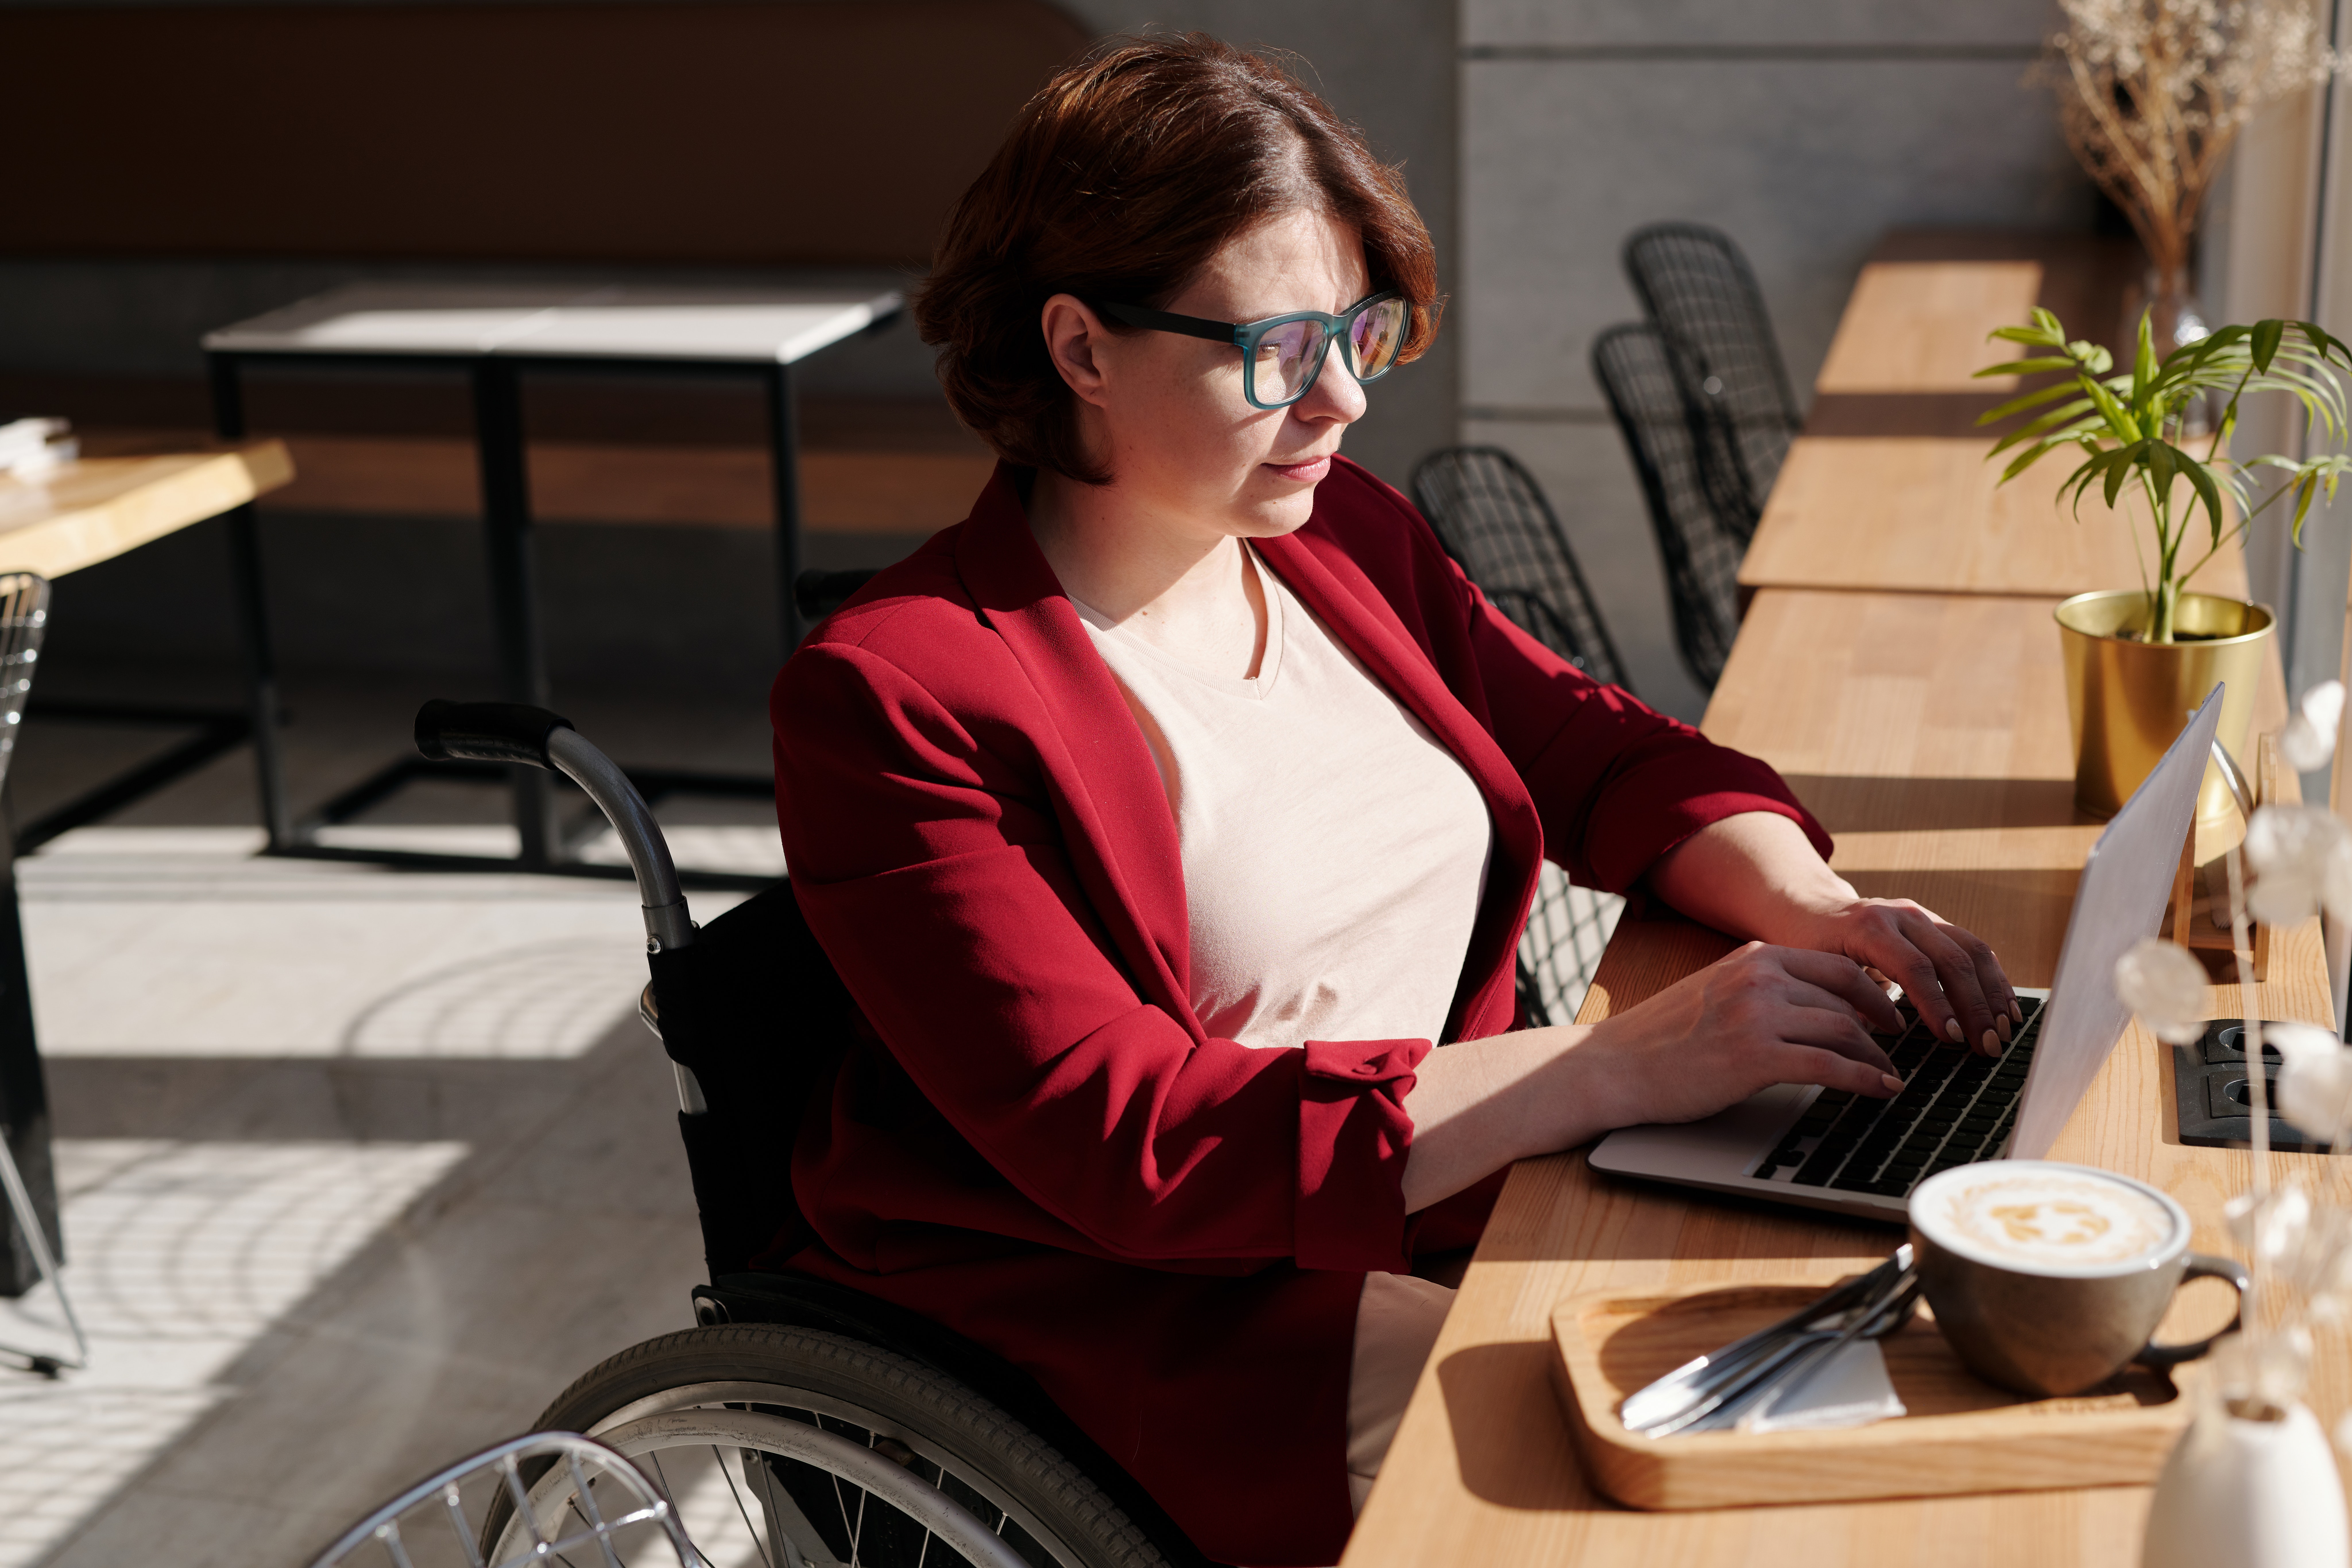 White woman in her mid-30's who is a wheelchair user sits in a café and works on her laptop while having a latte. She is wearing glasses with blue frames, a red blazer, and has red hair.